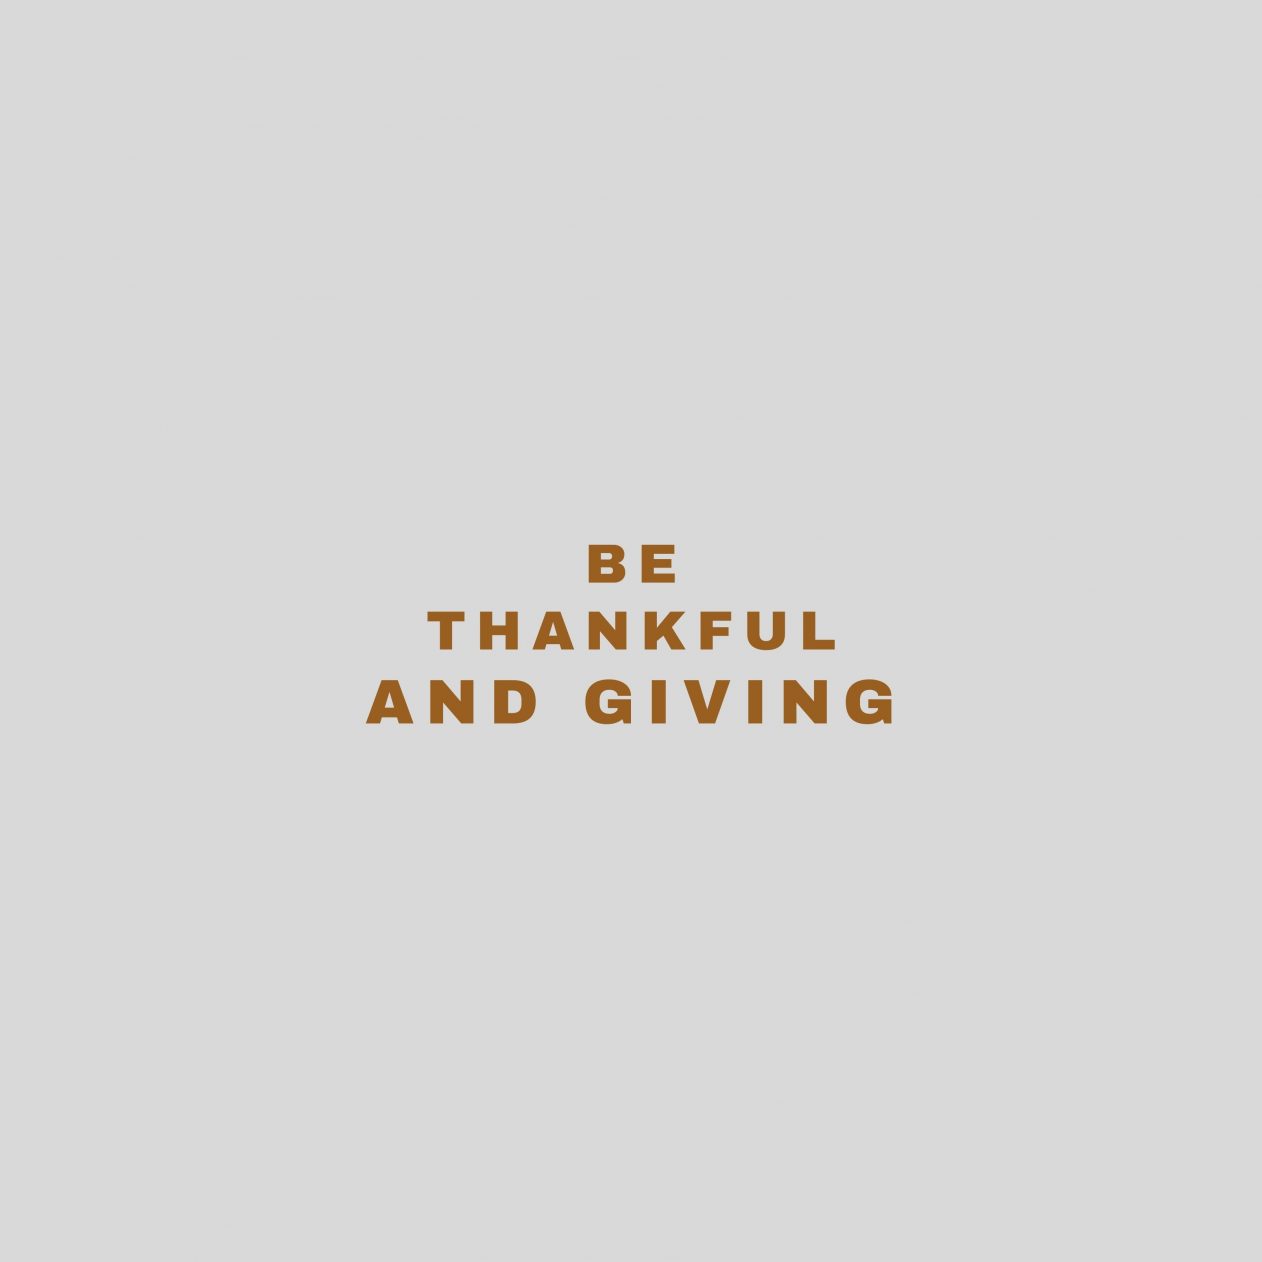 1262x1262 Parallax wallpaper 4k Be Thankful and Giving Quote iPad Wallpaper 1262x1262 pixels resolution